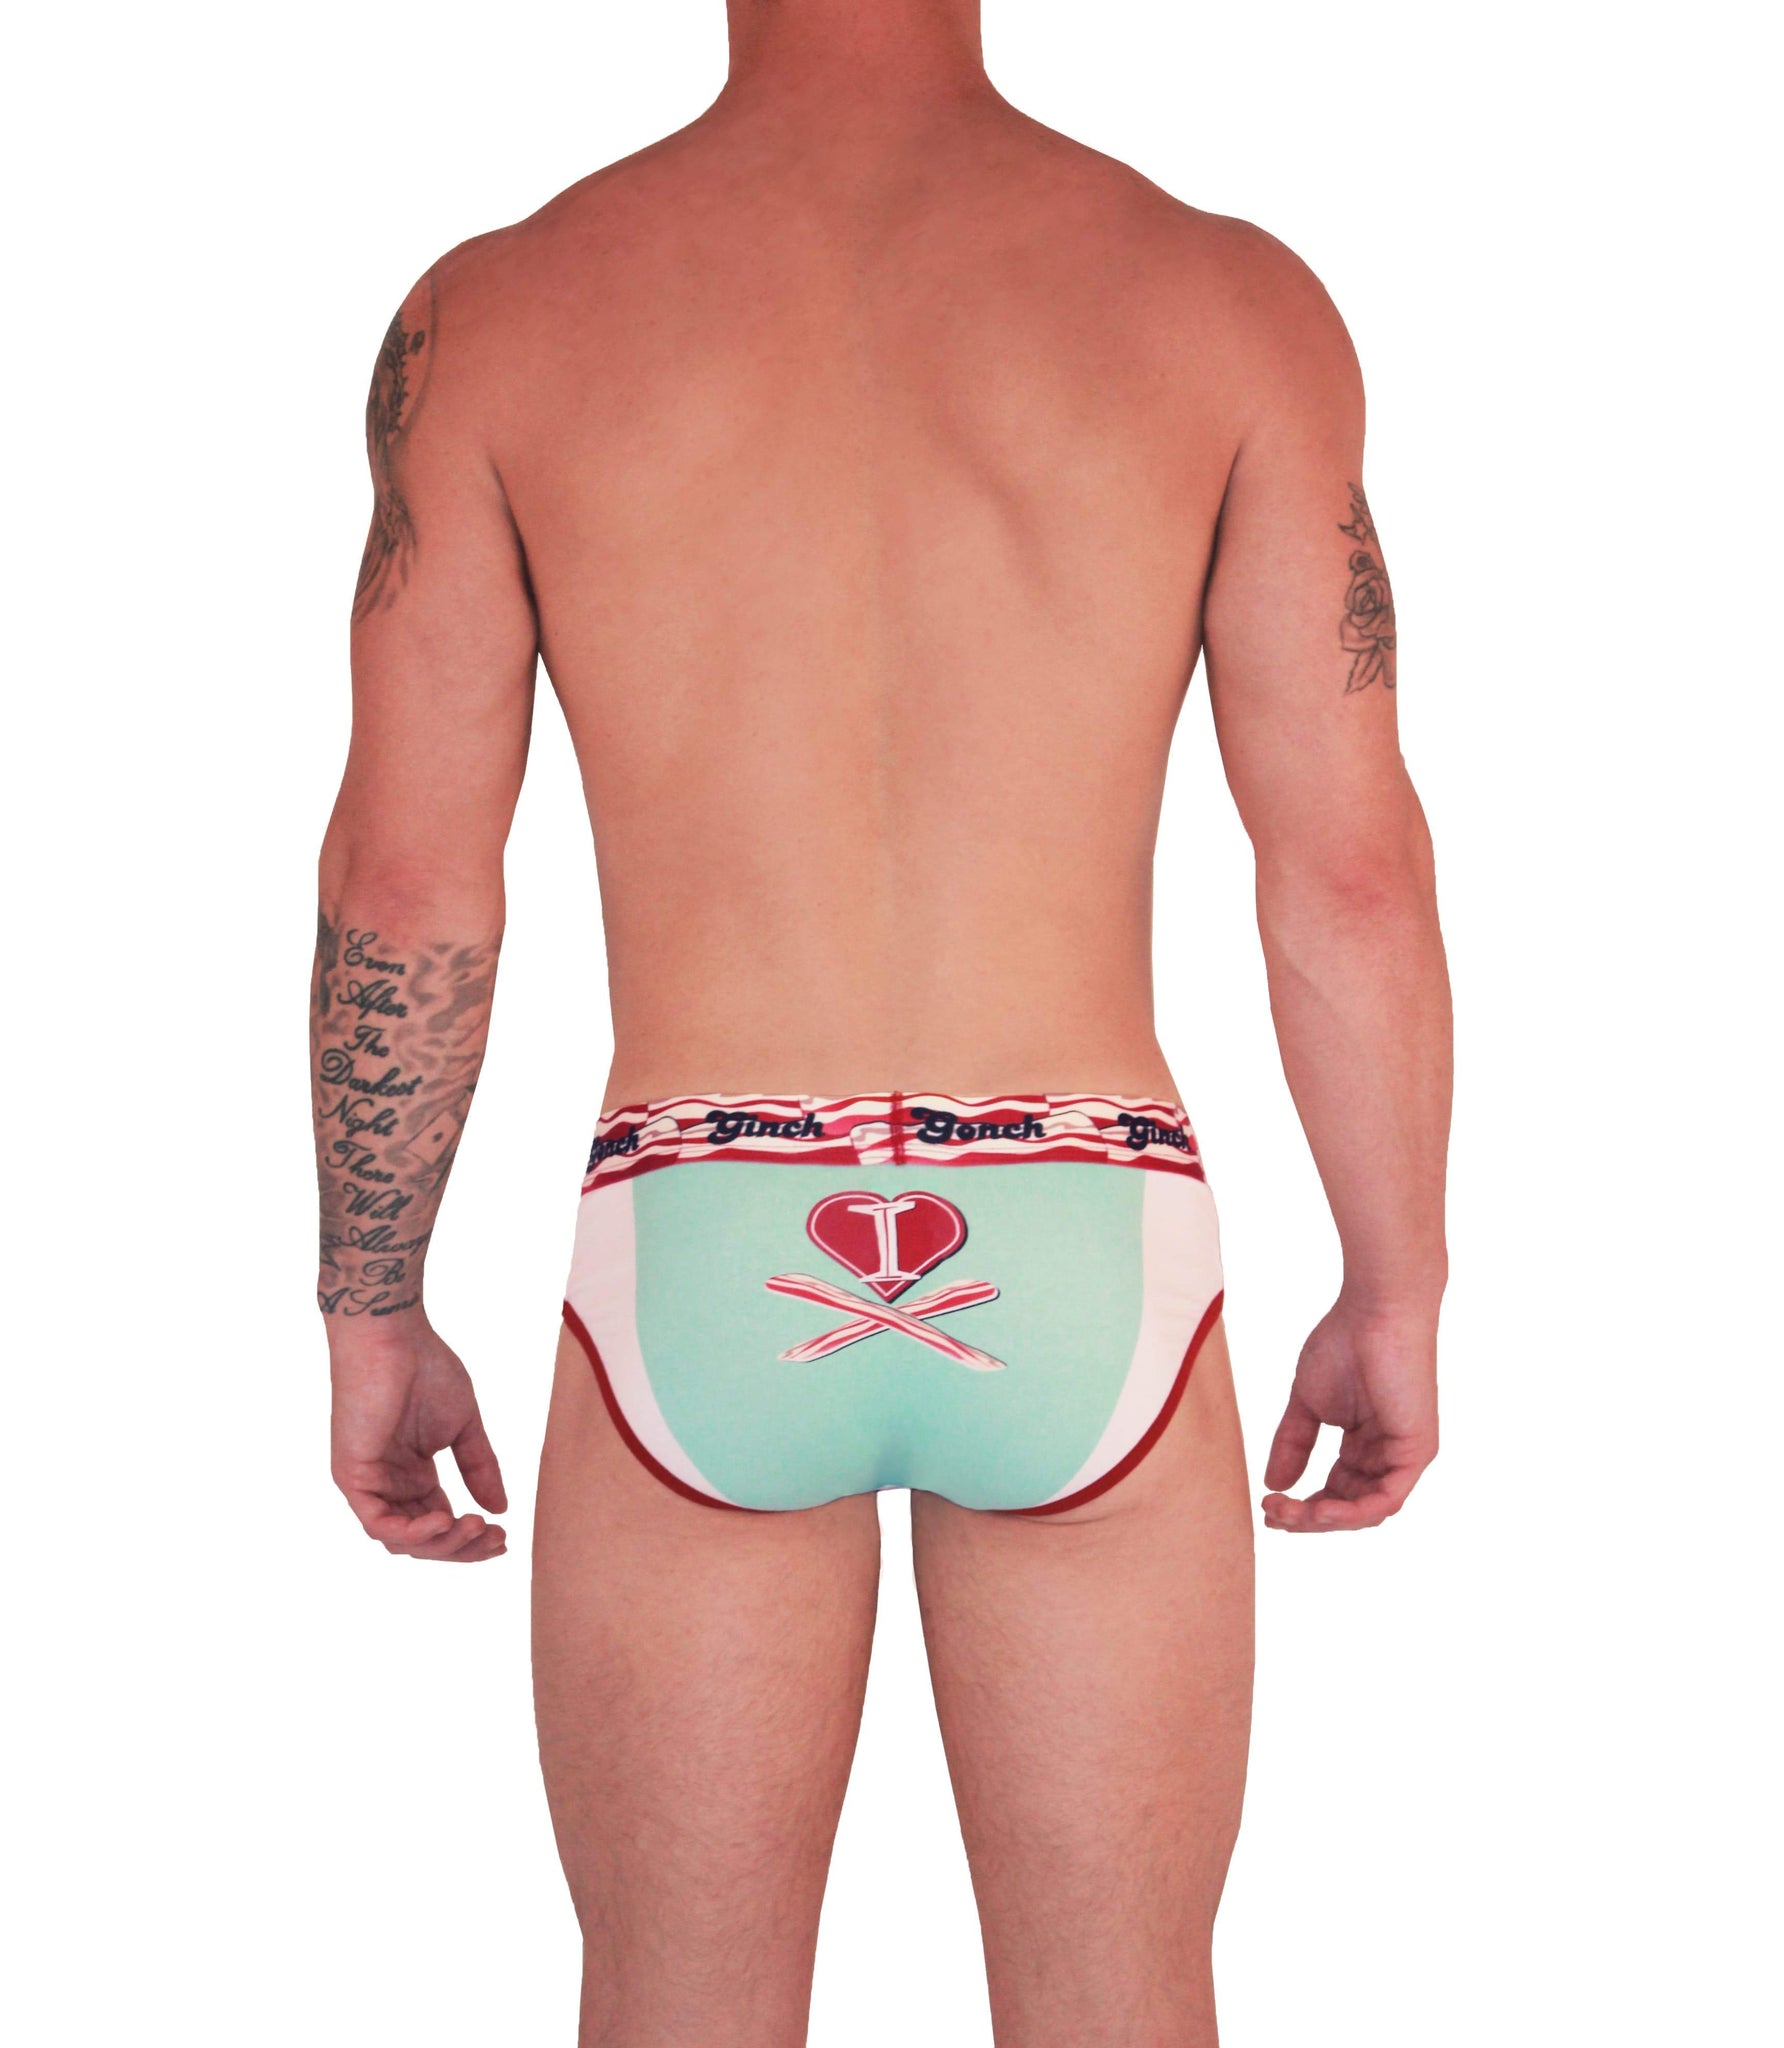 I Love Bacon Boxer Low Rise Brief Ginch Gonch Men's underwear with white teal and bacon detail back